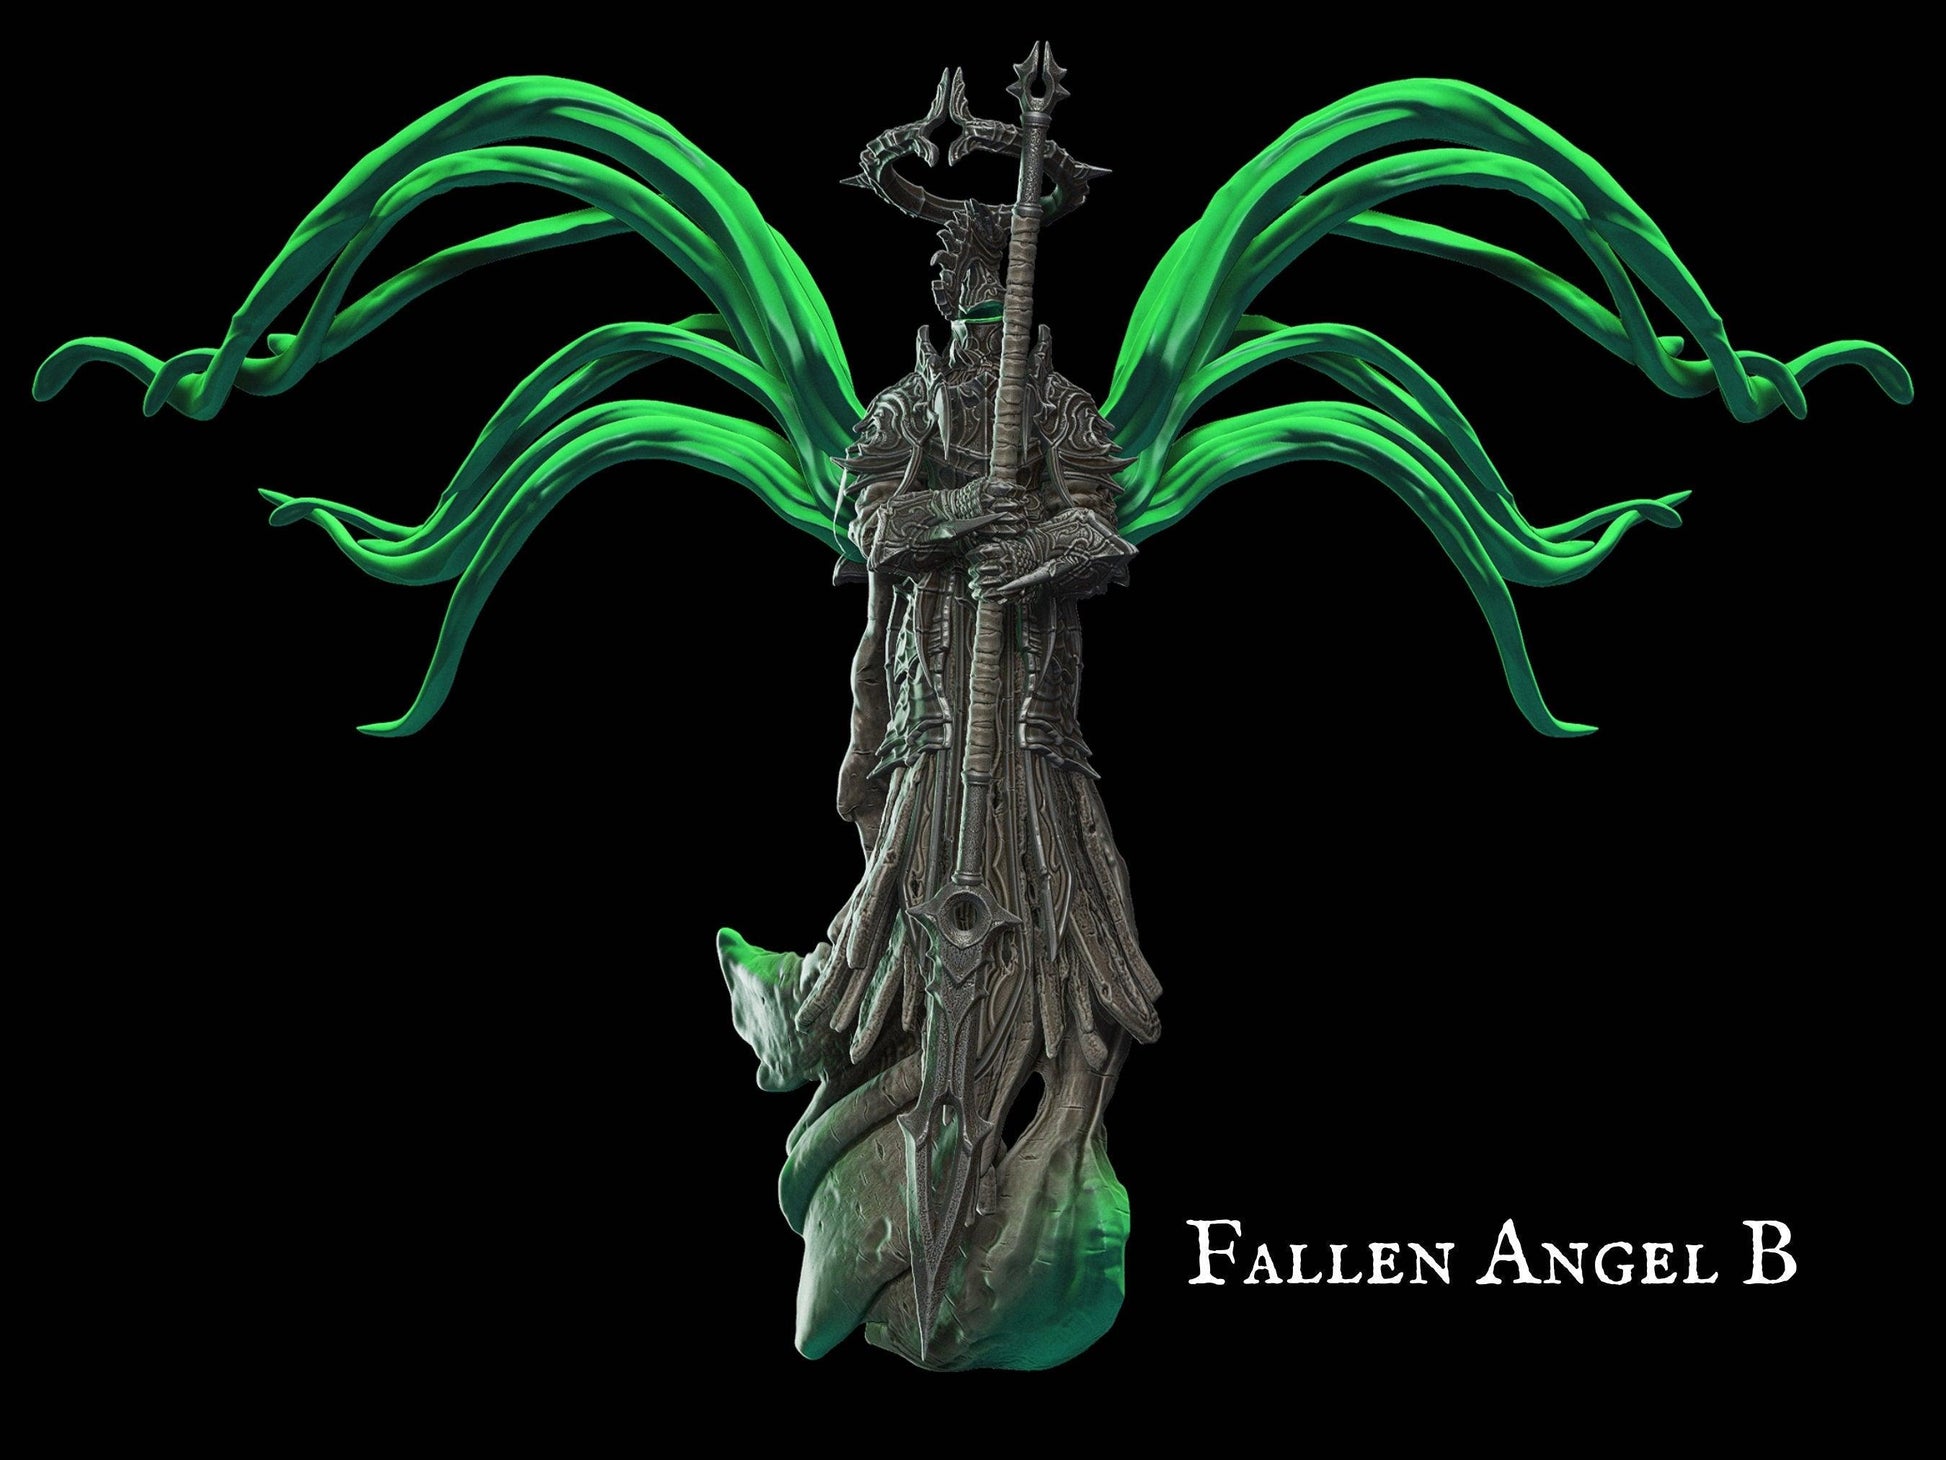 Fallen Angel Miniature 28mm scale Tabletop gaming DnD Miniature Dungeons and Dragons dnd 5e dungeon master gift dnd angel mini - Plague Miniatures shop for DnD Miniatures